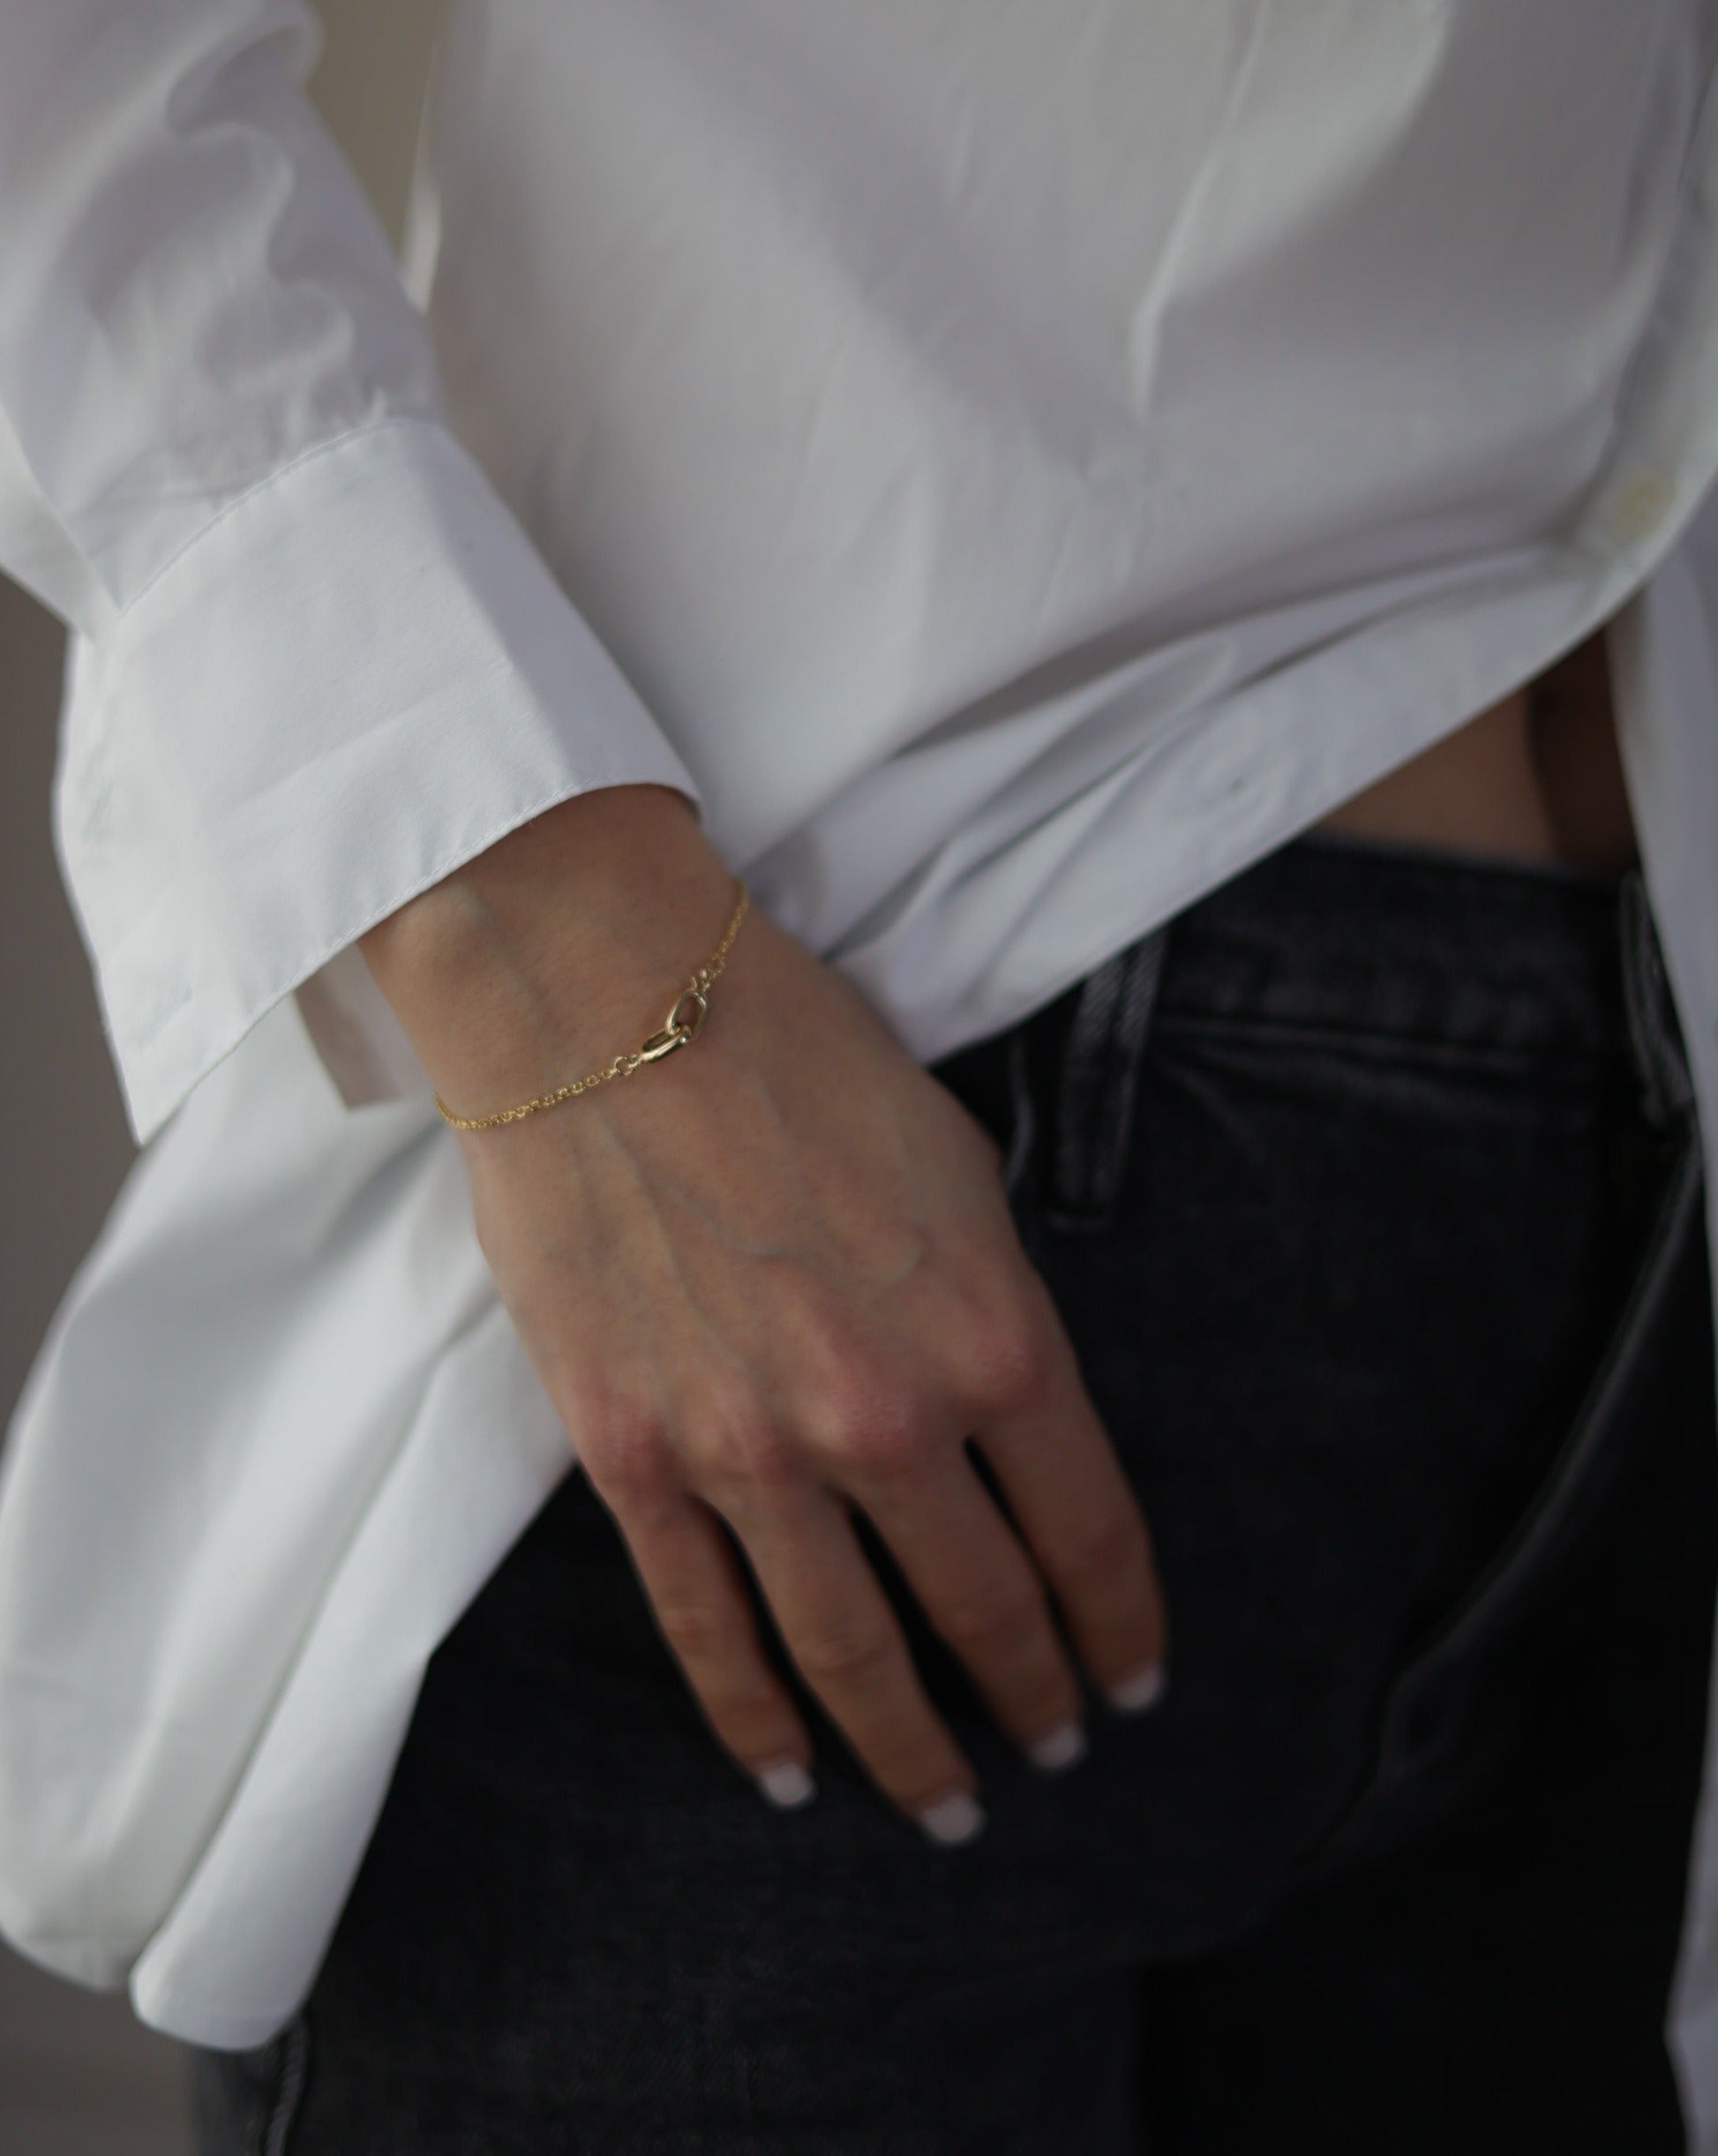 women in a white dress shirt and black jeans wearing a 14 karat gold bracelet with a interlocking clasp 